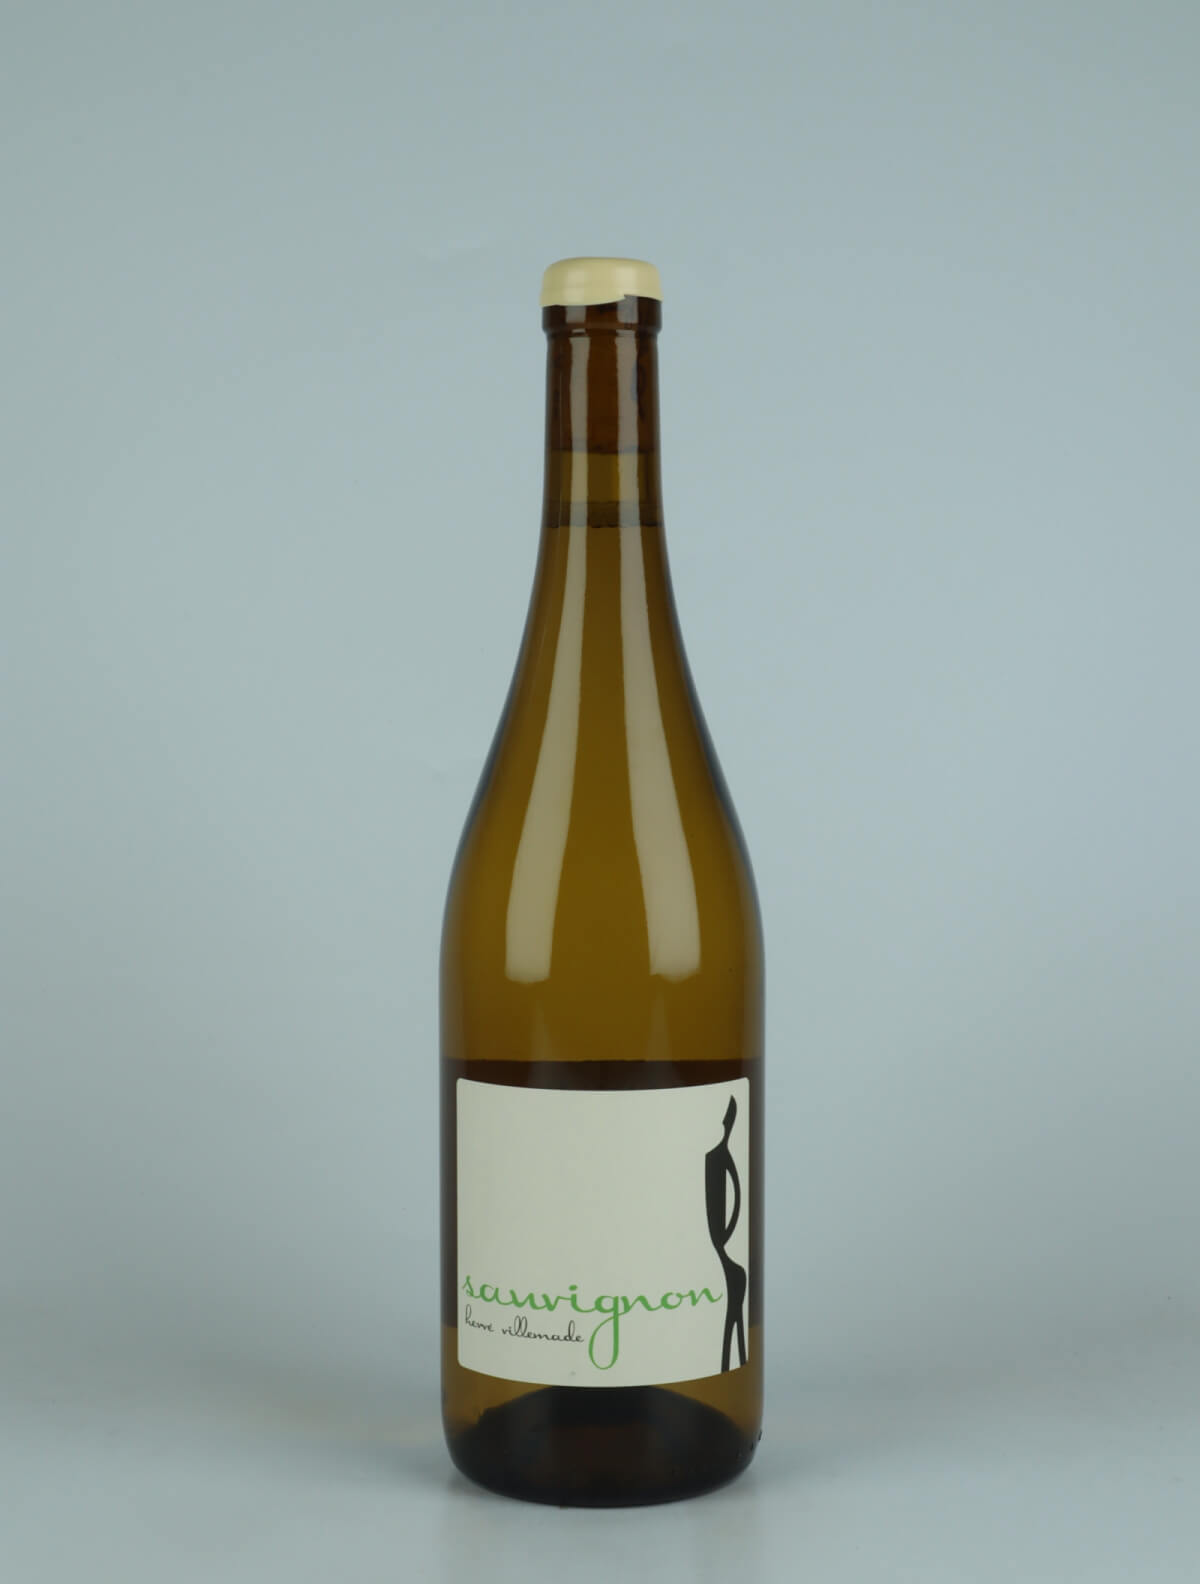 A bottle 2023 Sauvignon Blanc White wine from Hervé Villemade, Loire in France